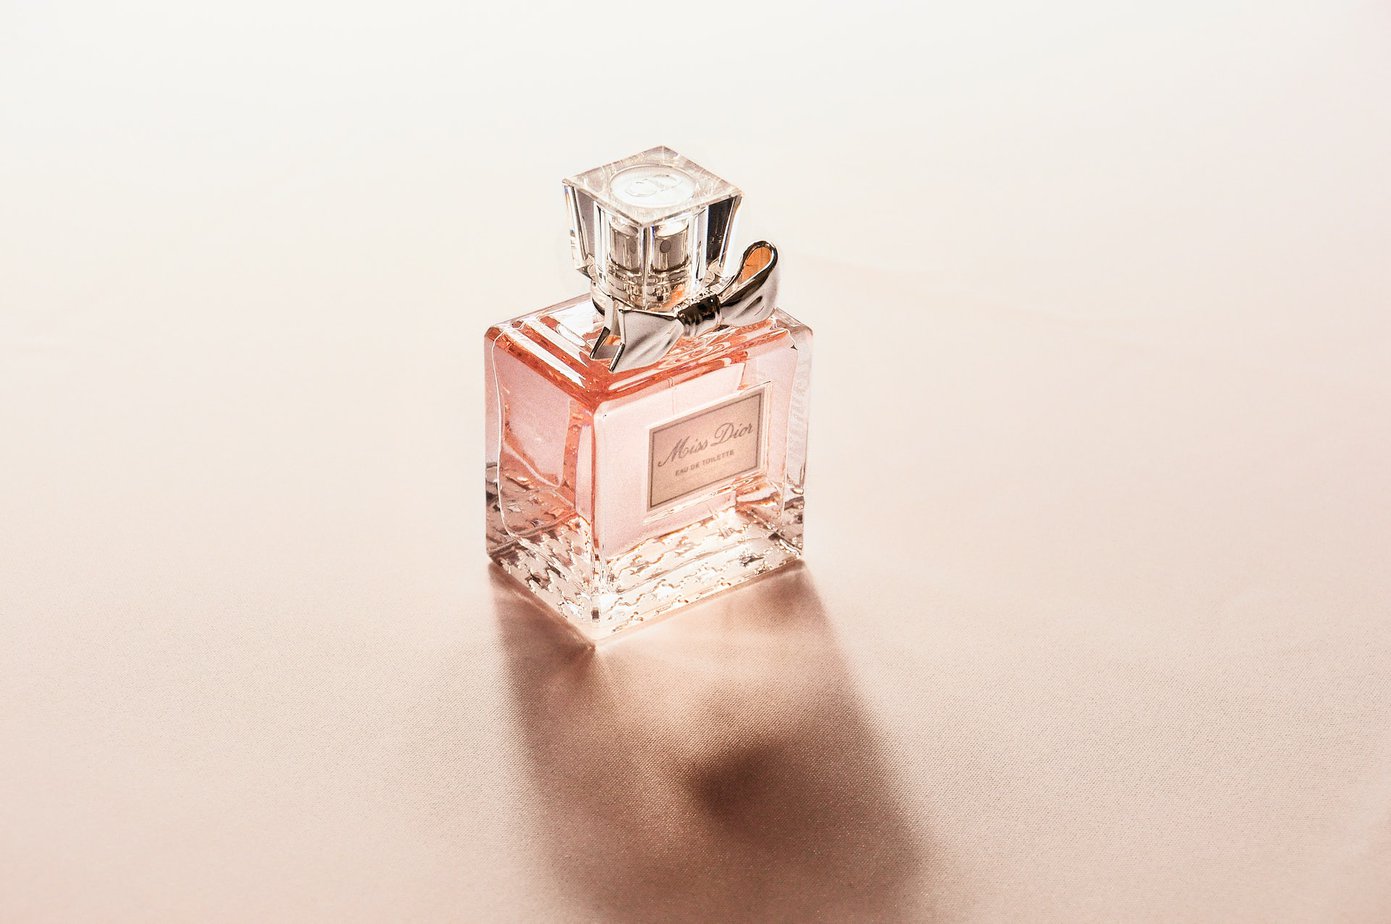 5 Women’s Perfumes That Will Make You Feel Irresistible!